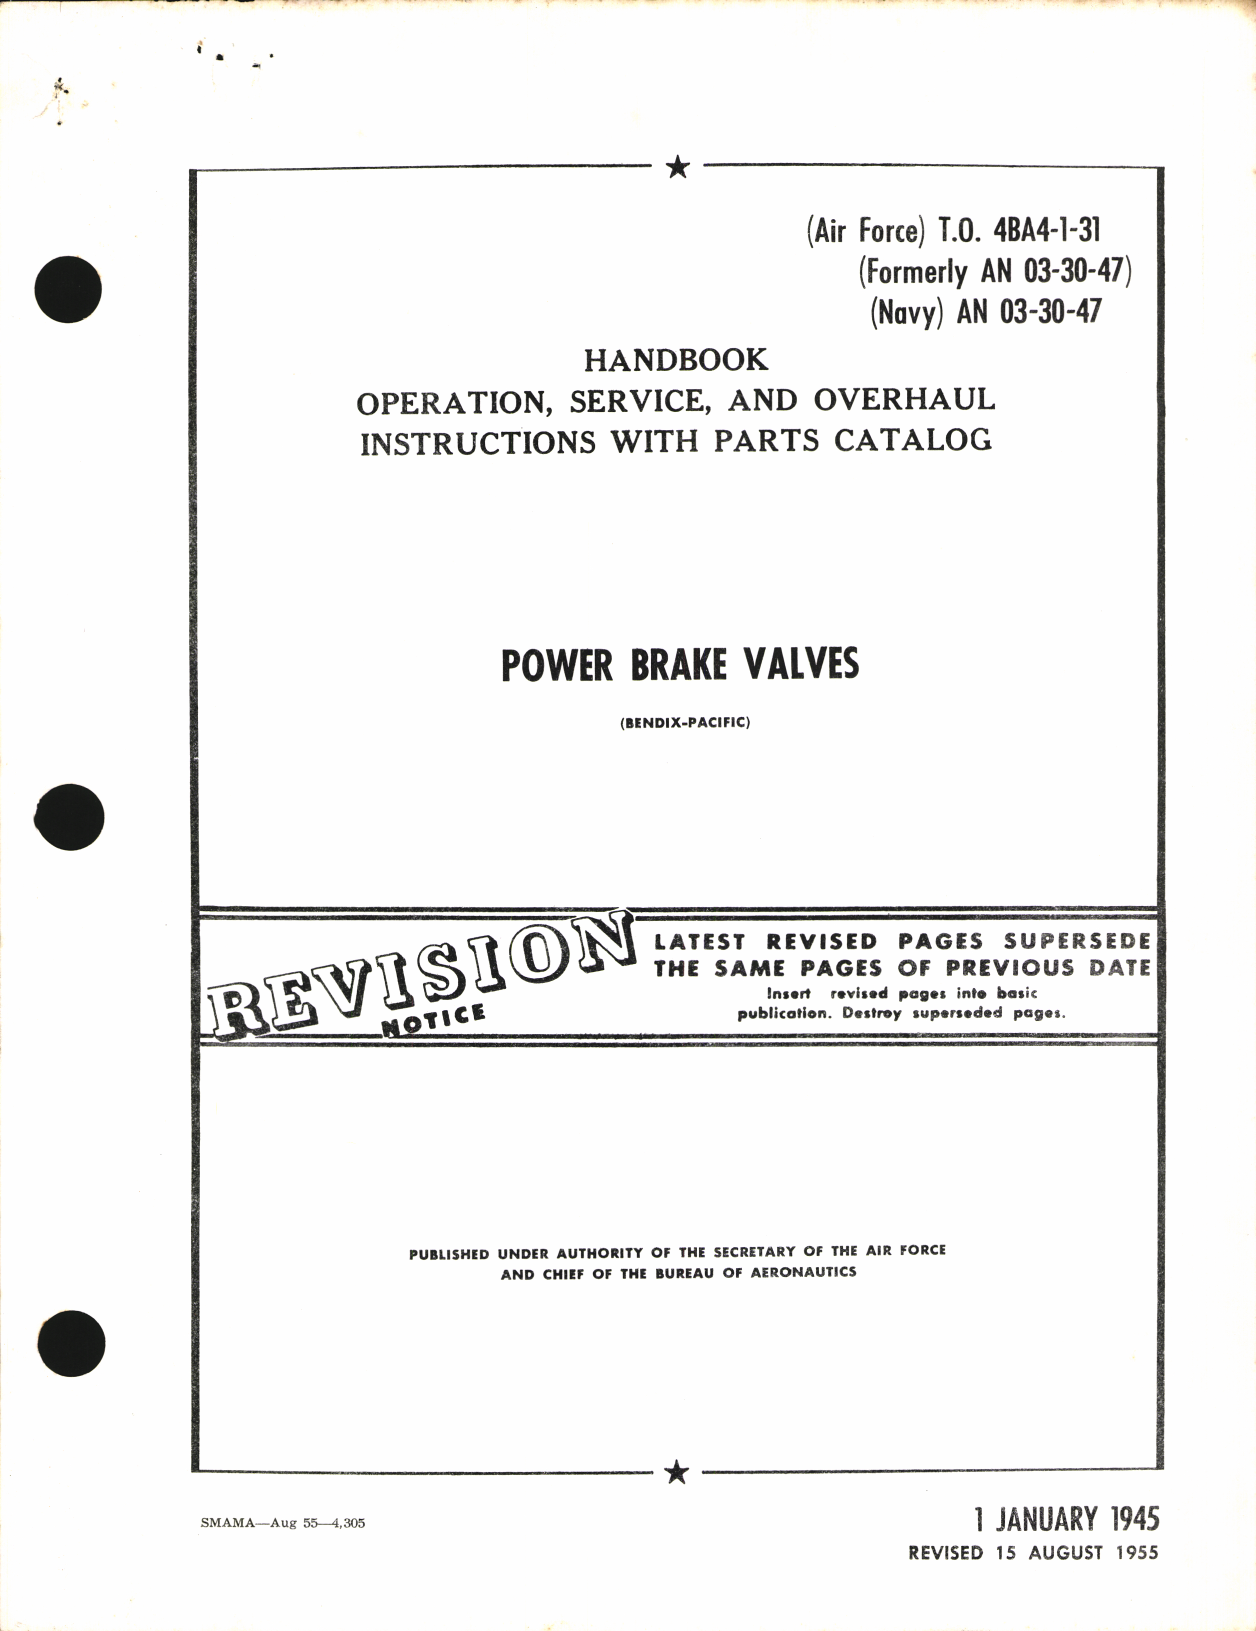 Sample page 1 from AirCorps Library document: Operation, Service, & Overhaul Instructions with Parts Catalog for Power Brake Valves